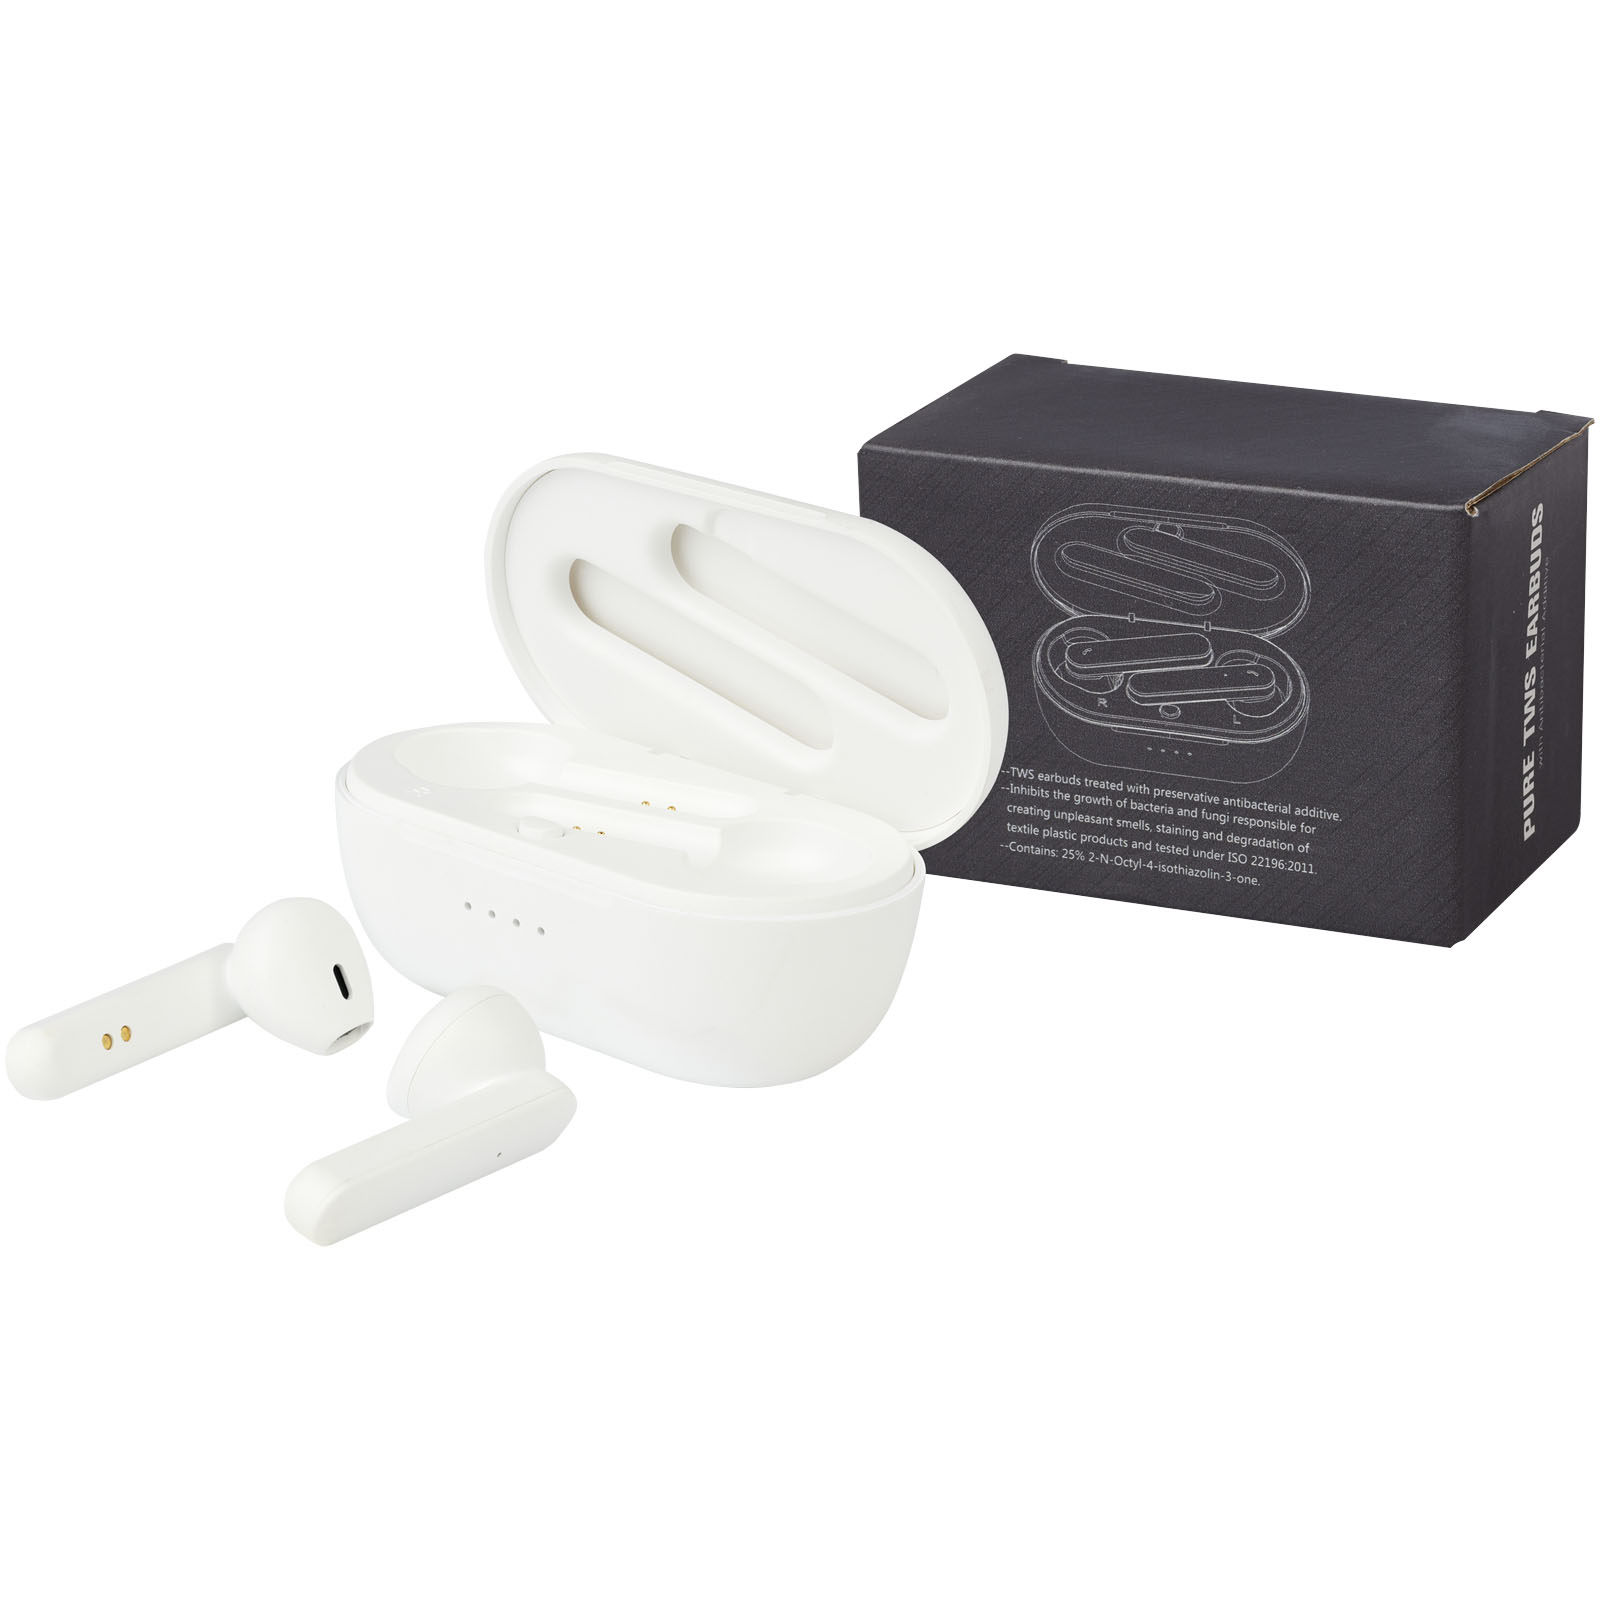 Advertising Earbuds - Pure TWS earbuds with antibacterial additive - 4